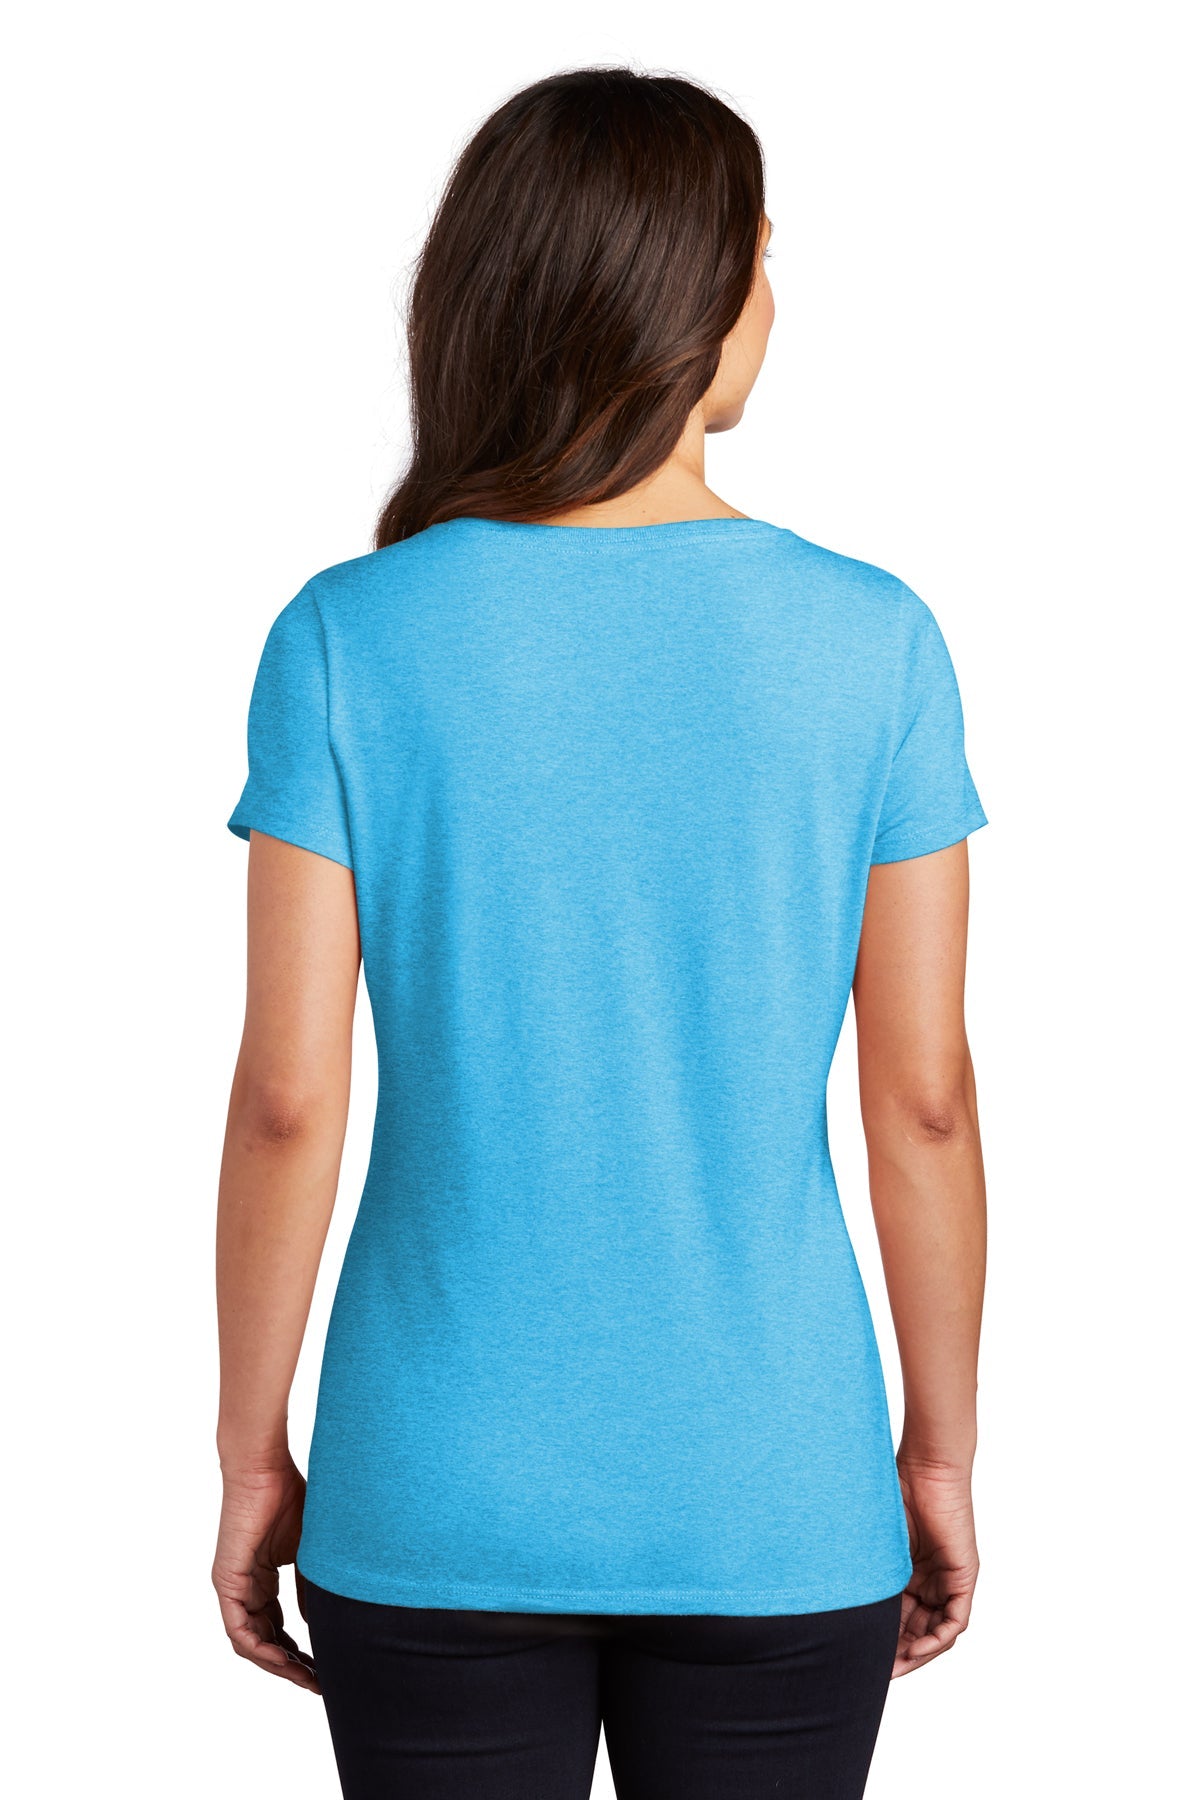 District Made Ladies Perfect Tri V-Neck Tee